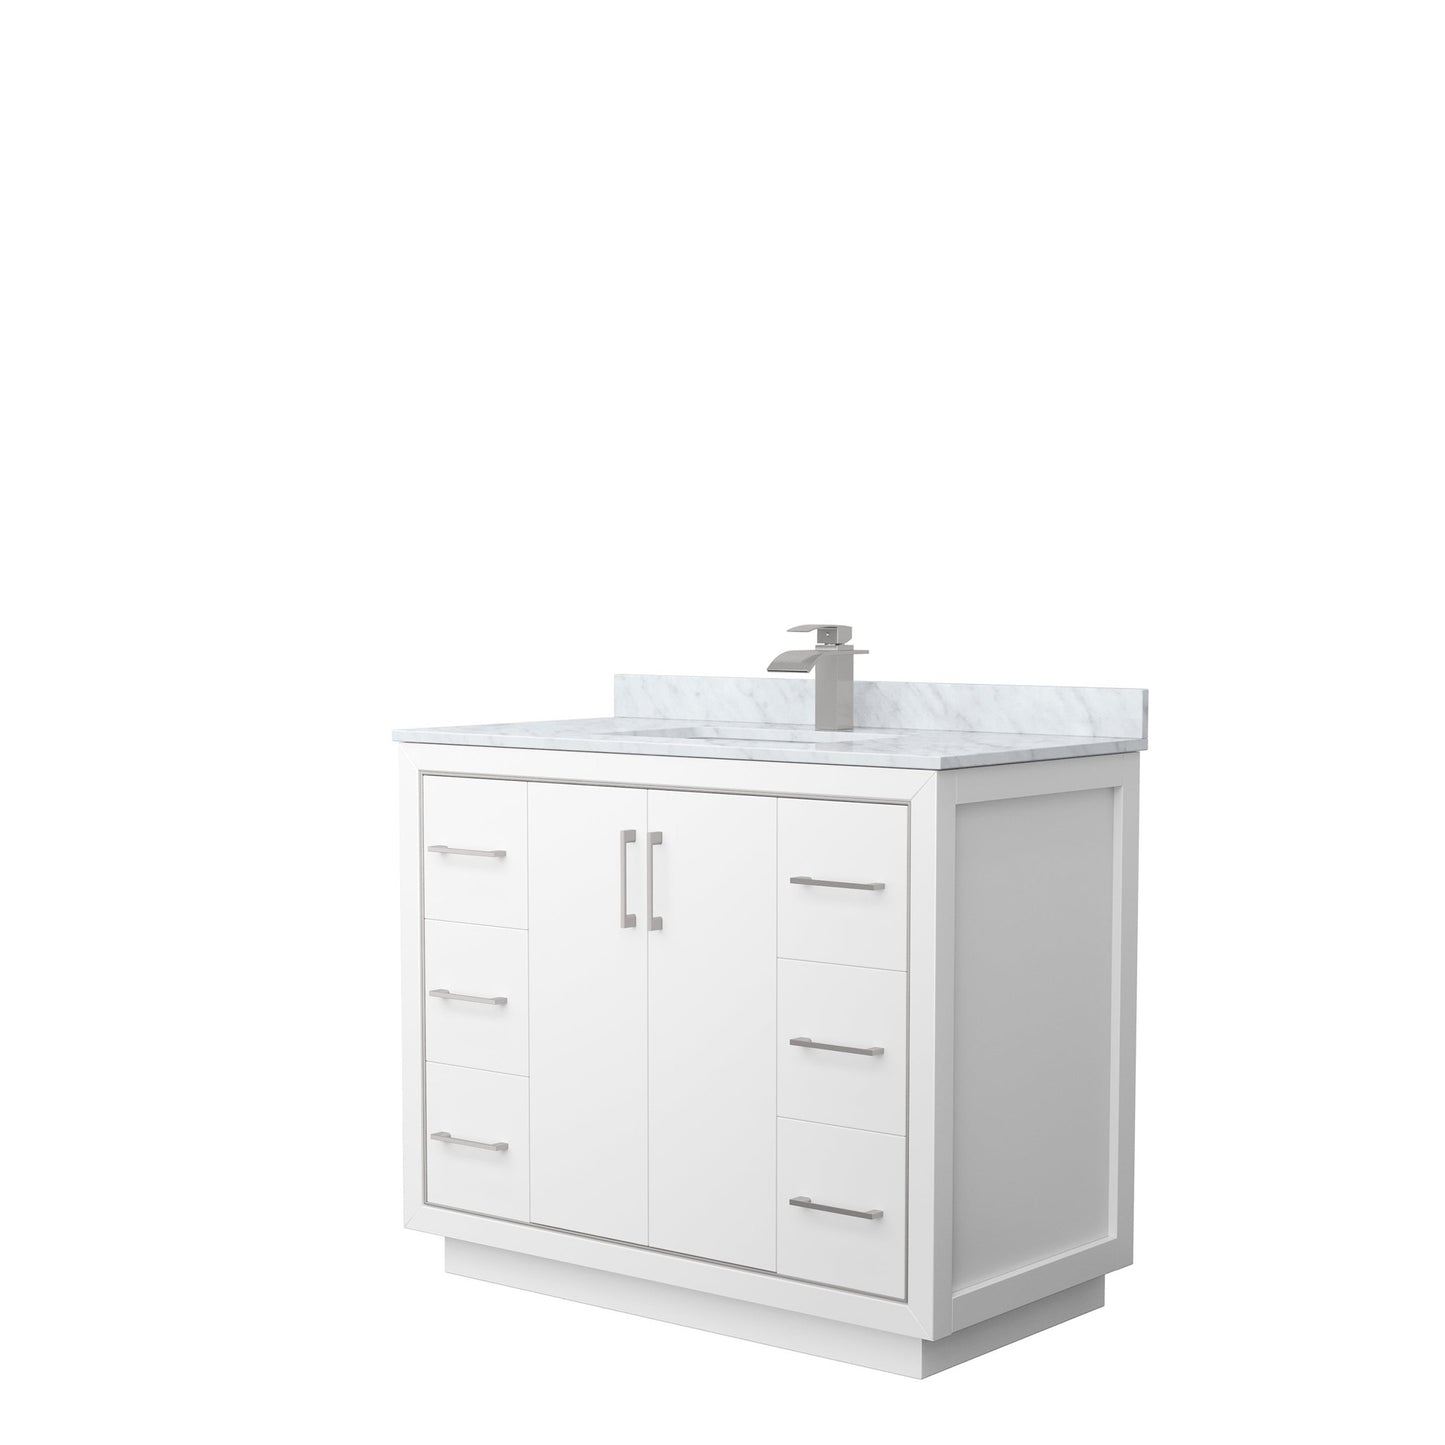 Wyndham Collection Icon 42" Single Bathroom Vanity in White, White Carrara Marble Countertop, Undermount Square Sink, Brushed Nickel Trim